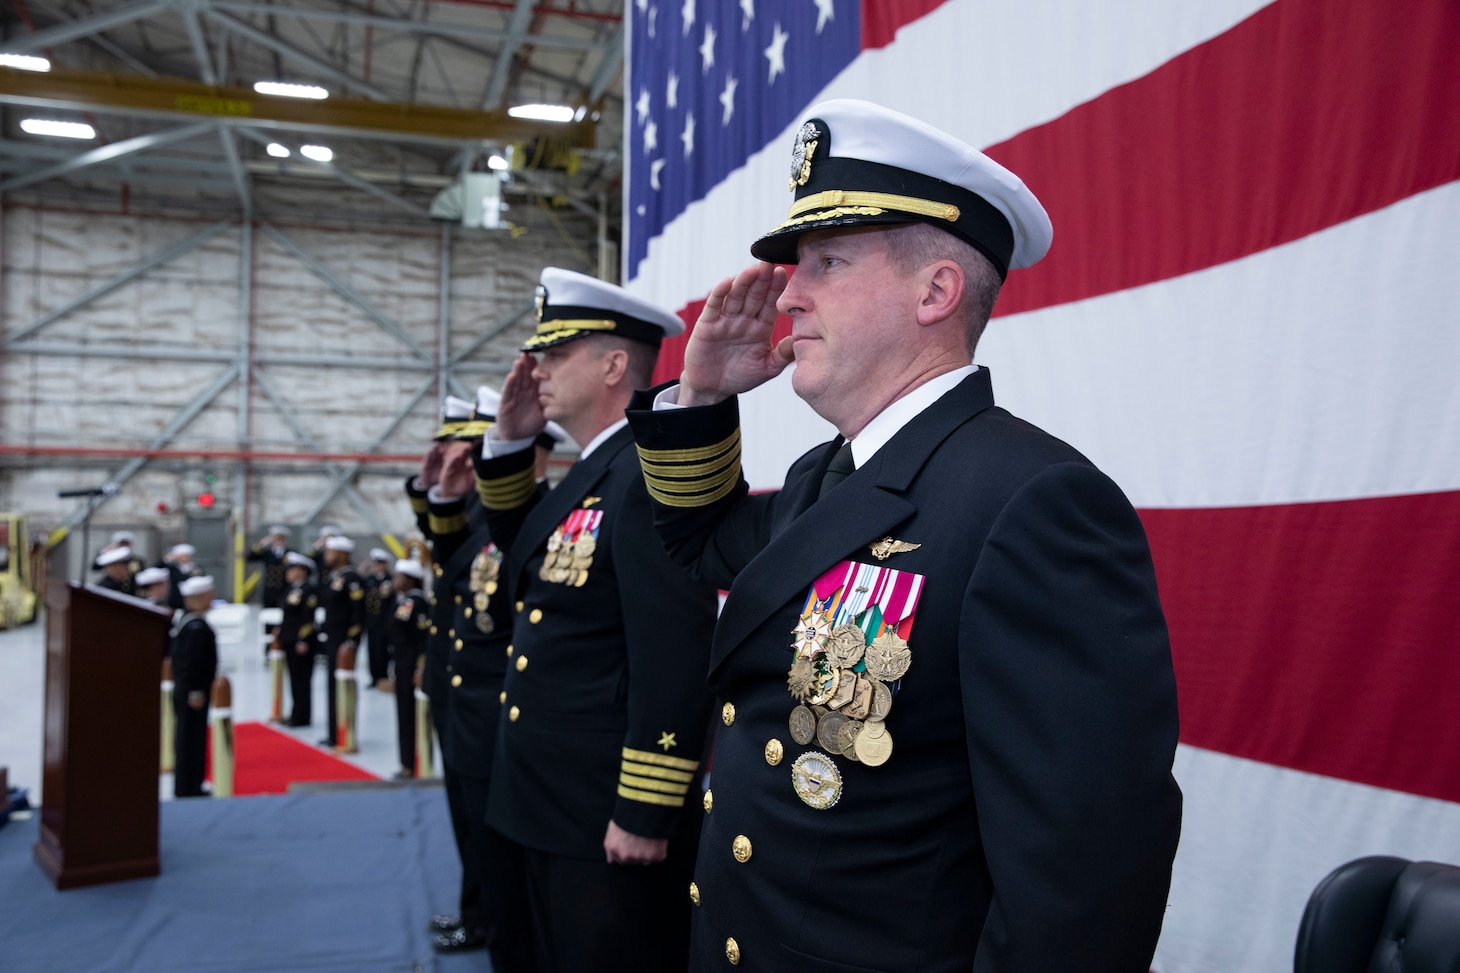 Capt. Dan Pugh (far right), incoming Commander, Fleet Logistics Support Wing (CFLSW), and Capt. Ian Hawley, outgoing CFLSW, salute during the presentation of the colors and national anthem at the CFLSW change of command ceremony.